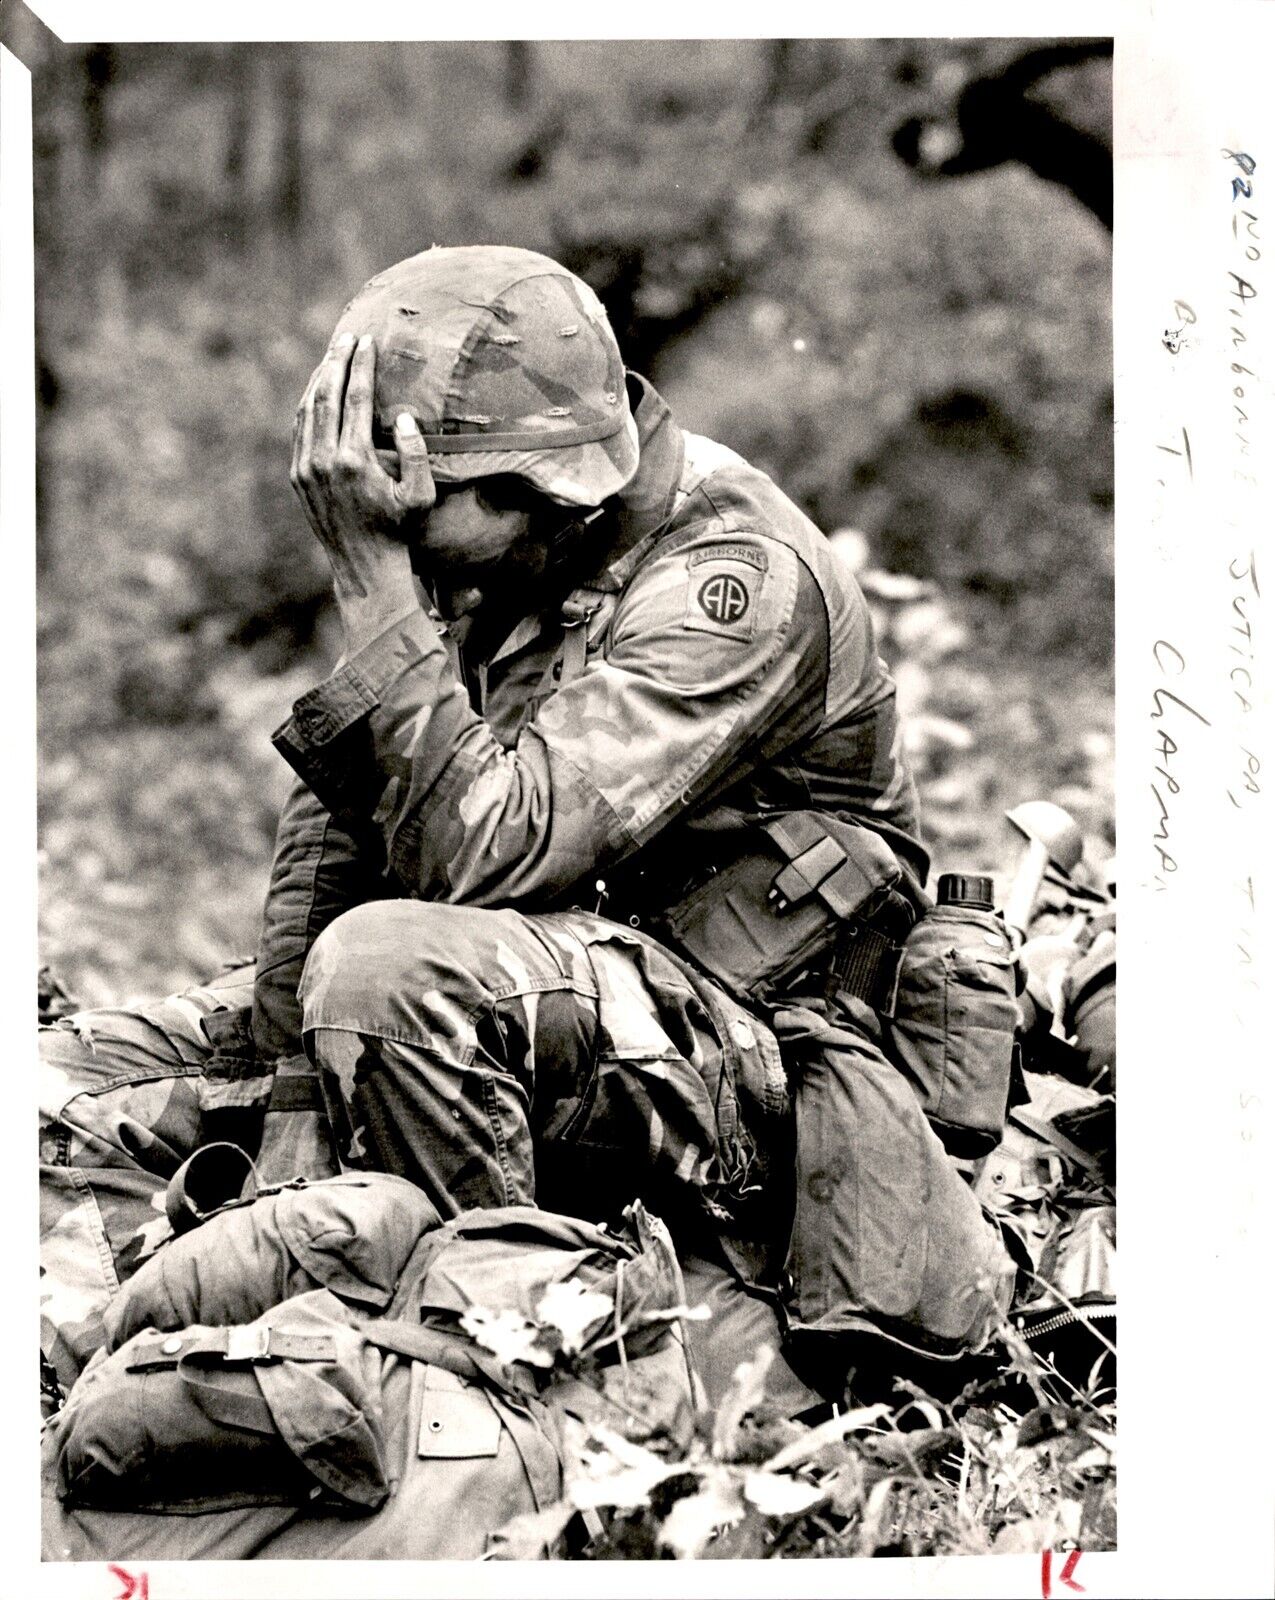 LG18 1988 Original Photo US ARMED FORCES IN HONDURAS 82ND AIRBORNE TIRED SOLDIER